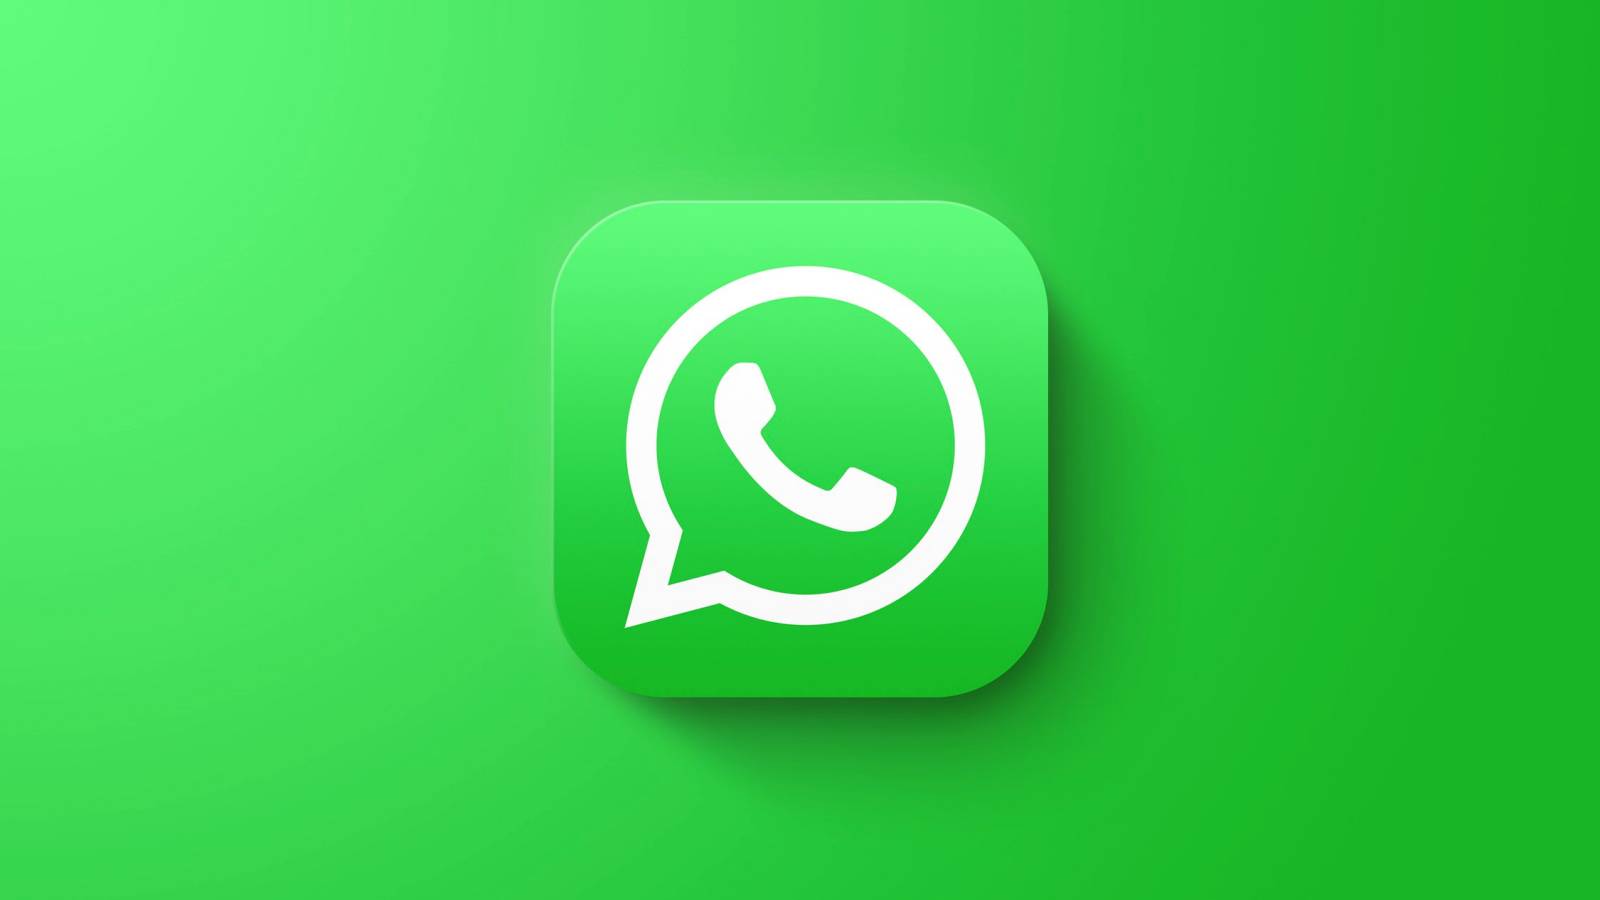 WhatsApp Notificare securitate iphone android